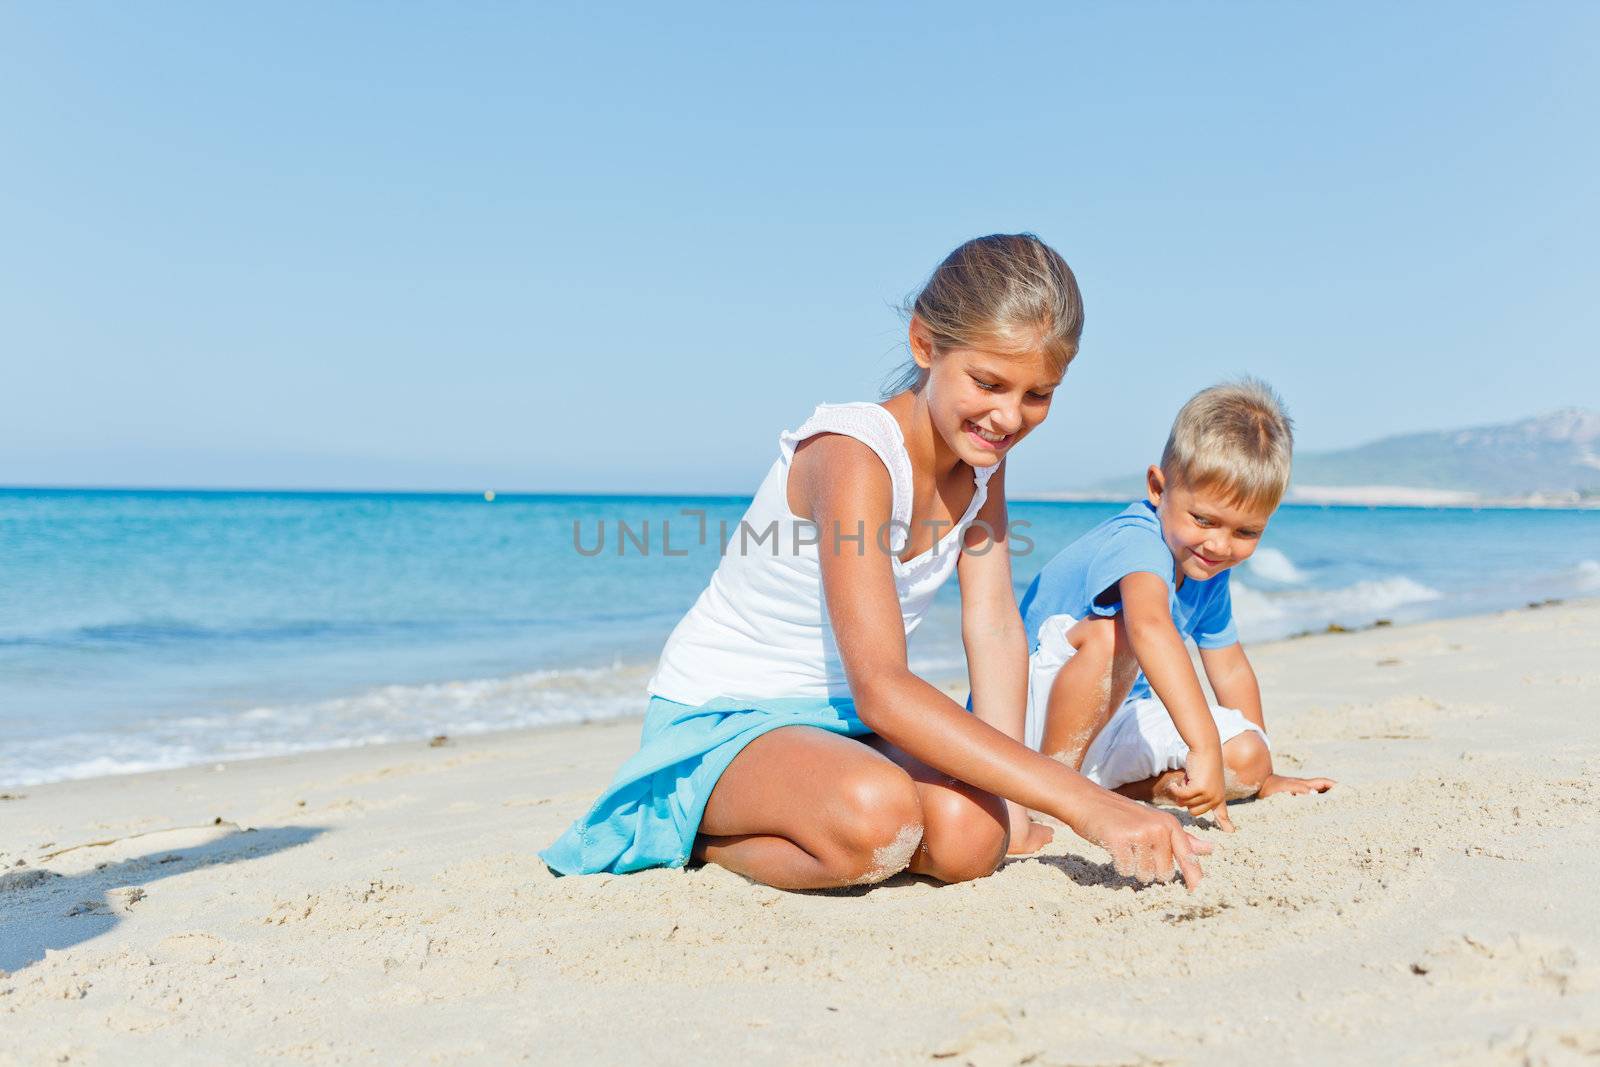 Two cute kids playing on tropical beach